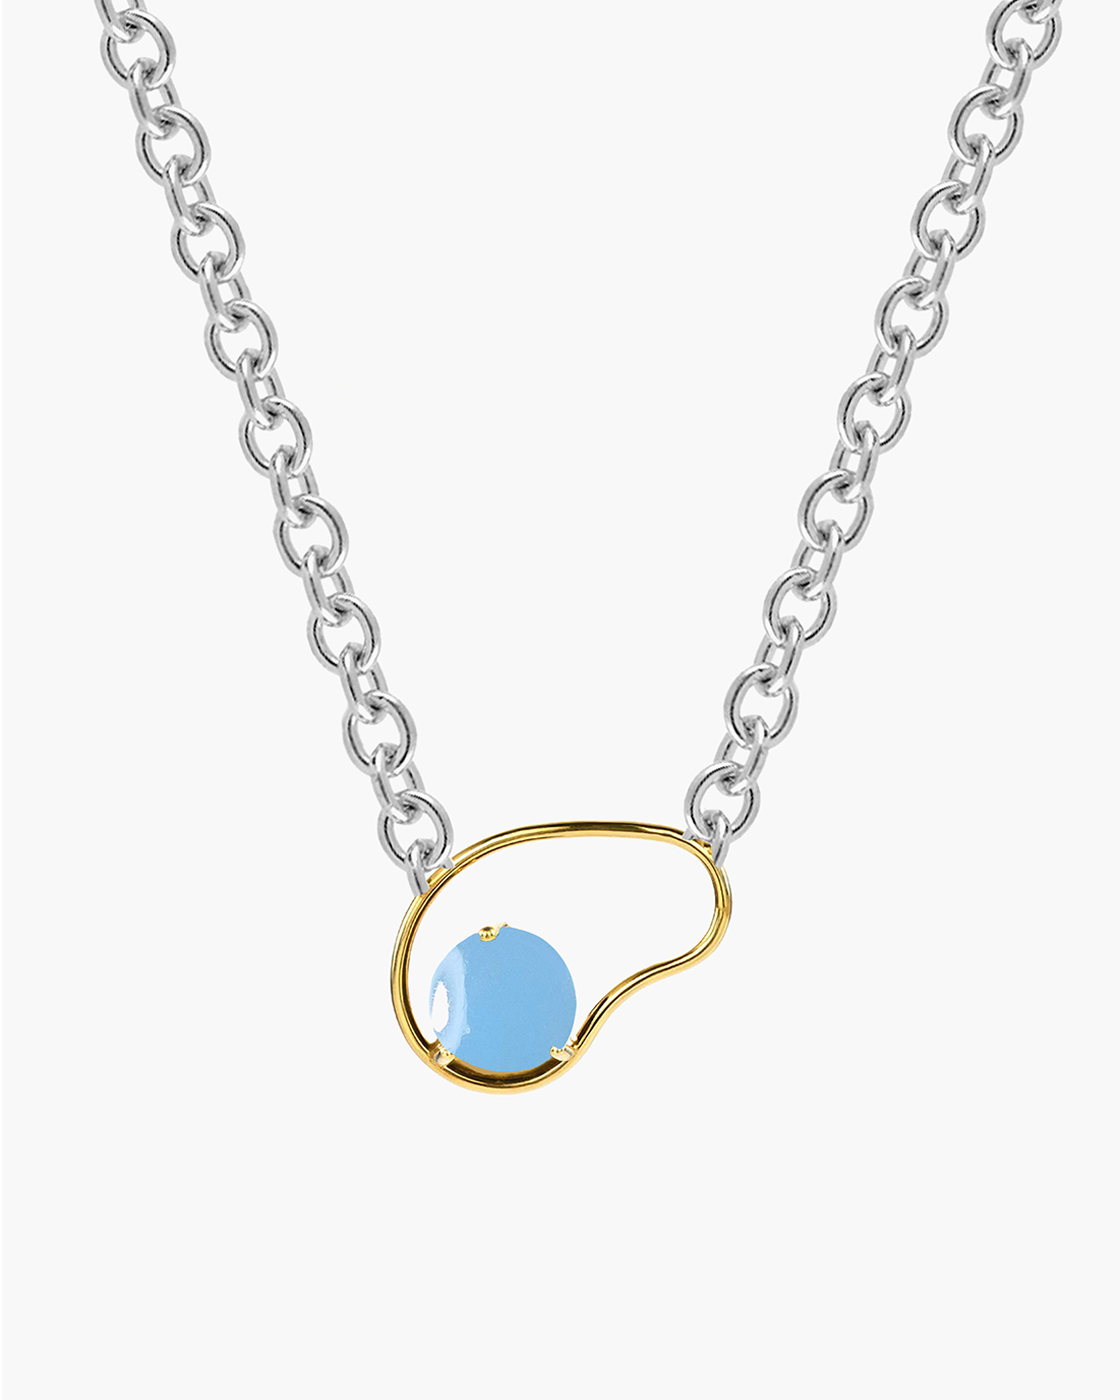 Neon Big Gold and Silver Chalcedony Necklace